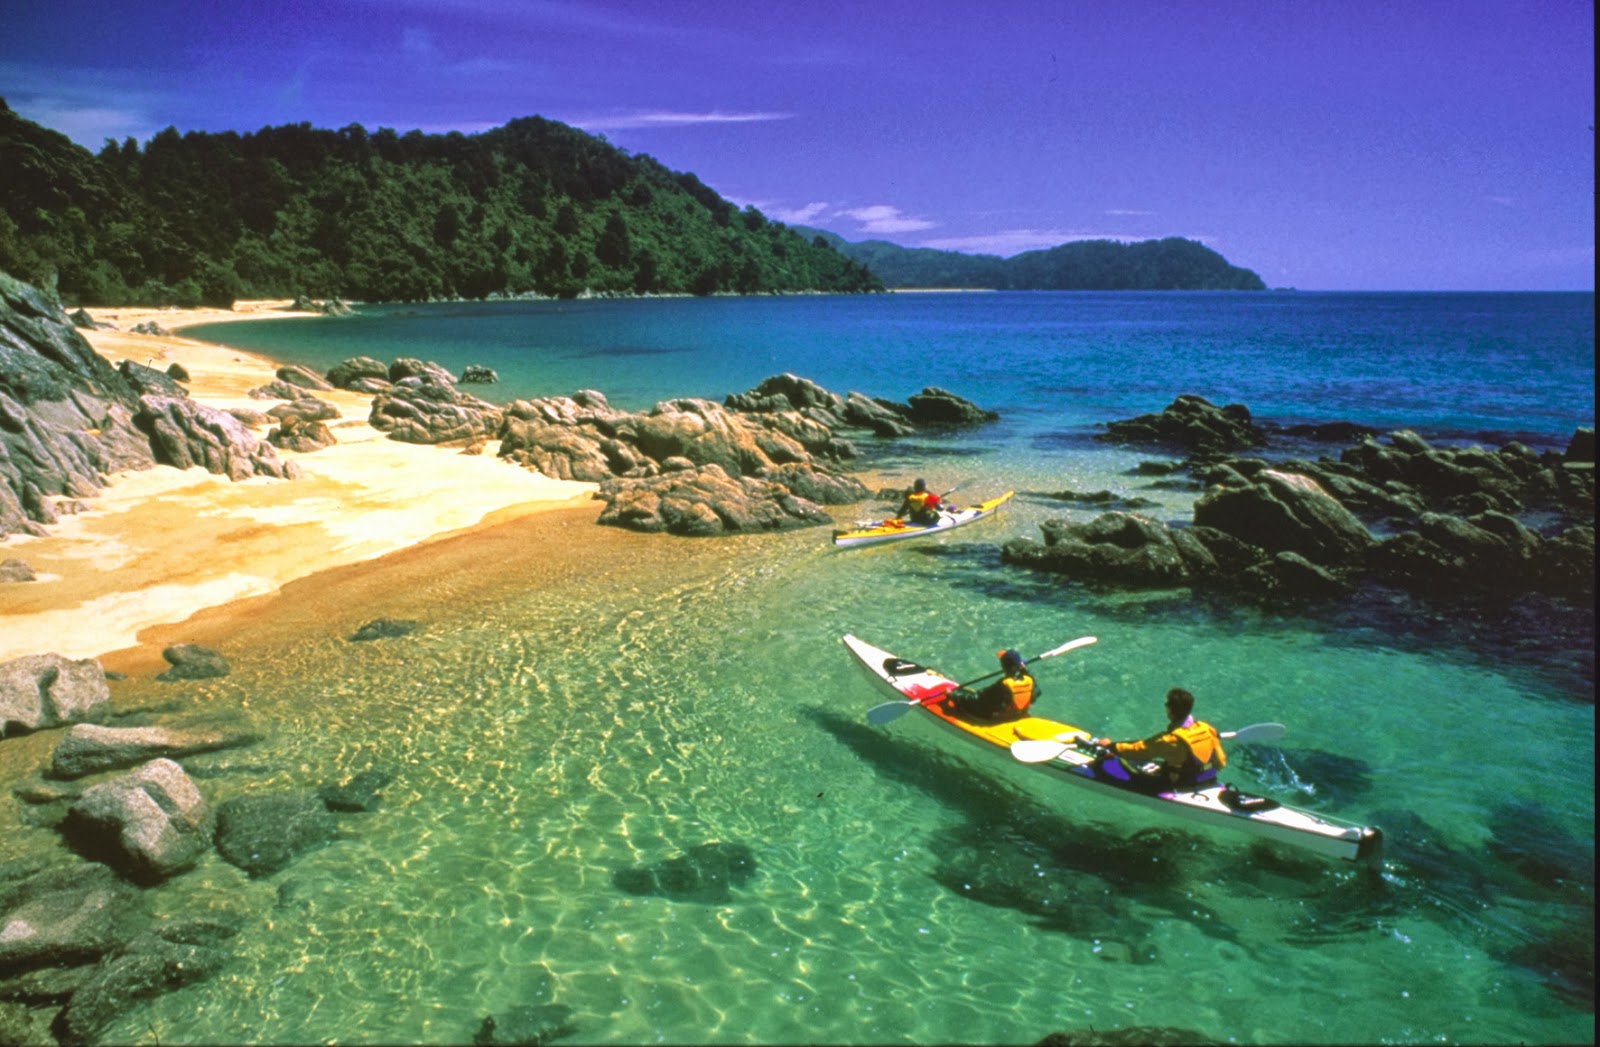 World Visits: New Zealand Top 5 Must See Attractions